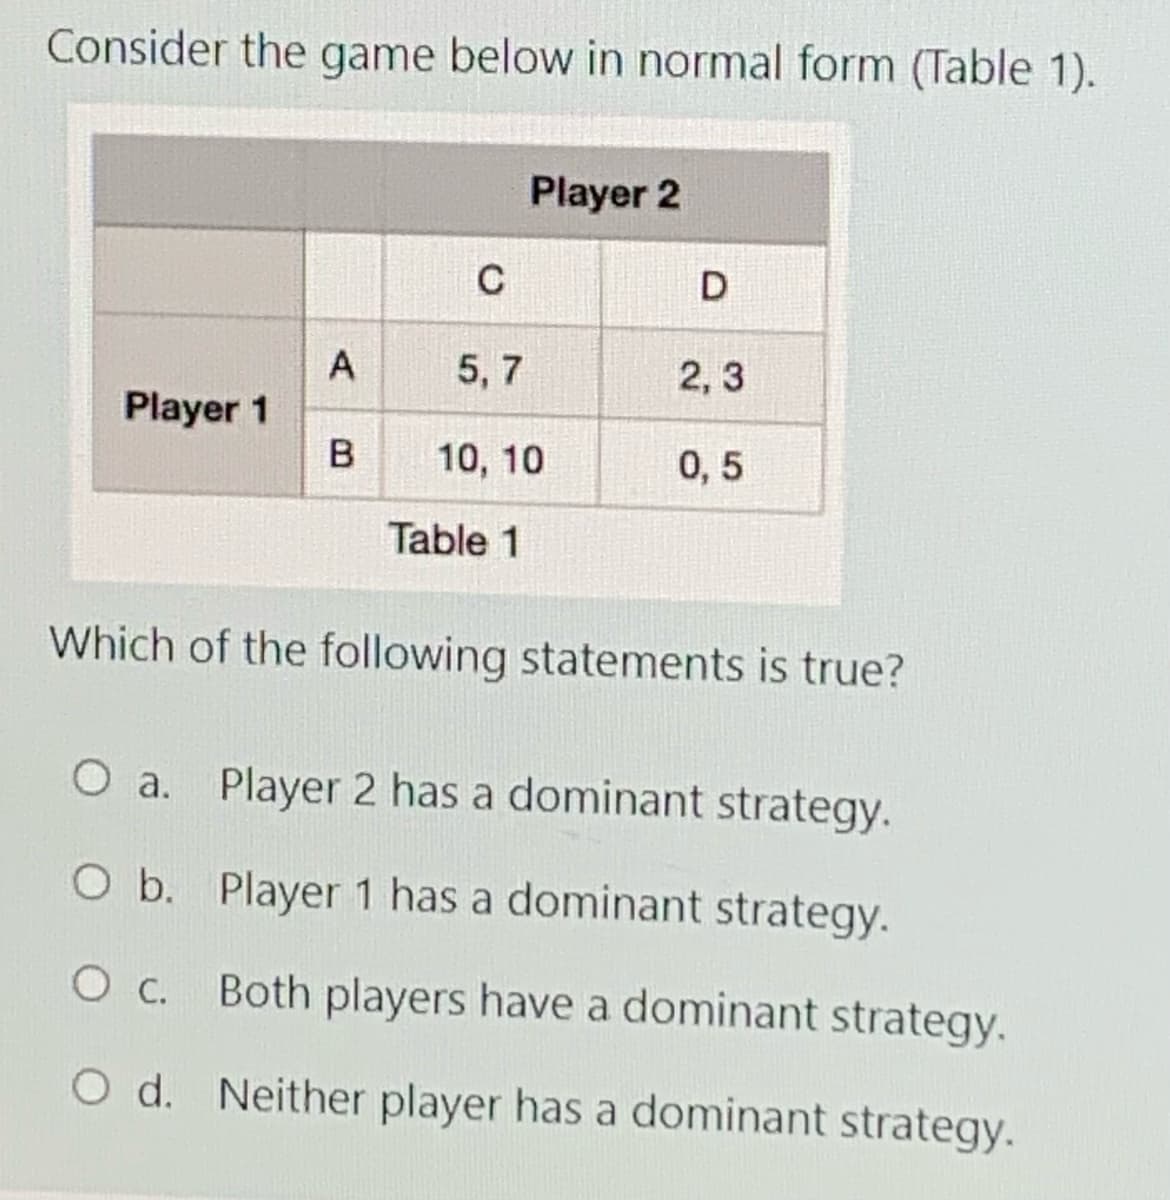 Consider the game below in normal form (Table 1).
Player 2
C
A
5, 7
2, 3
Player 1
10, 10
0, 5
Table 1
Which of the following statements is true?
O a. Player 2 has a dominant strategy.
O b. Player 1 has a dominant strategy.
O c. Both players have a dominant strategy.
O d. Neither player has a dominant strategy.
